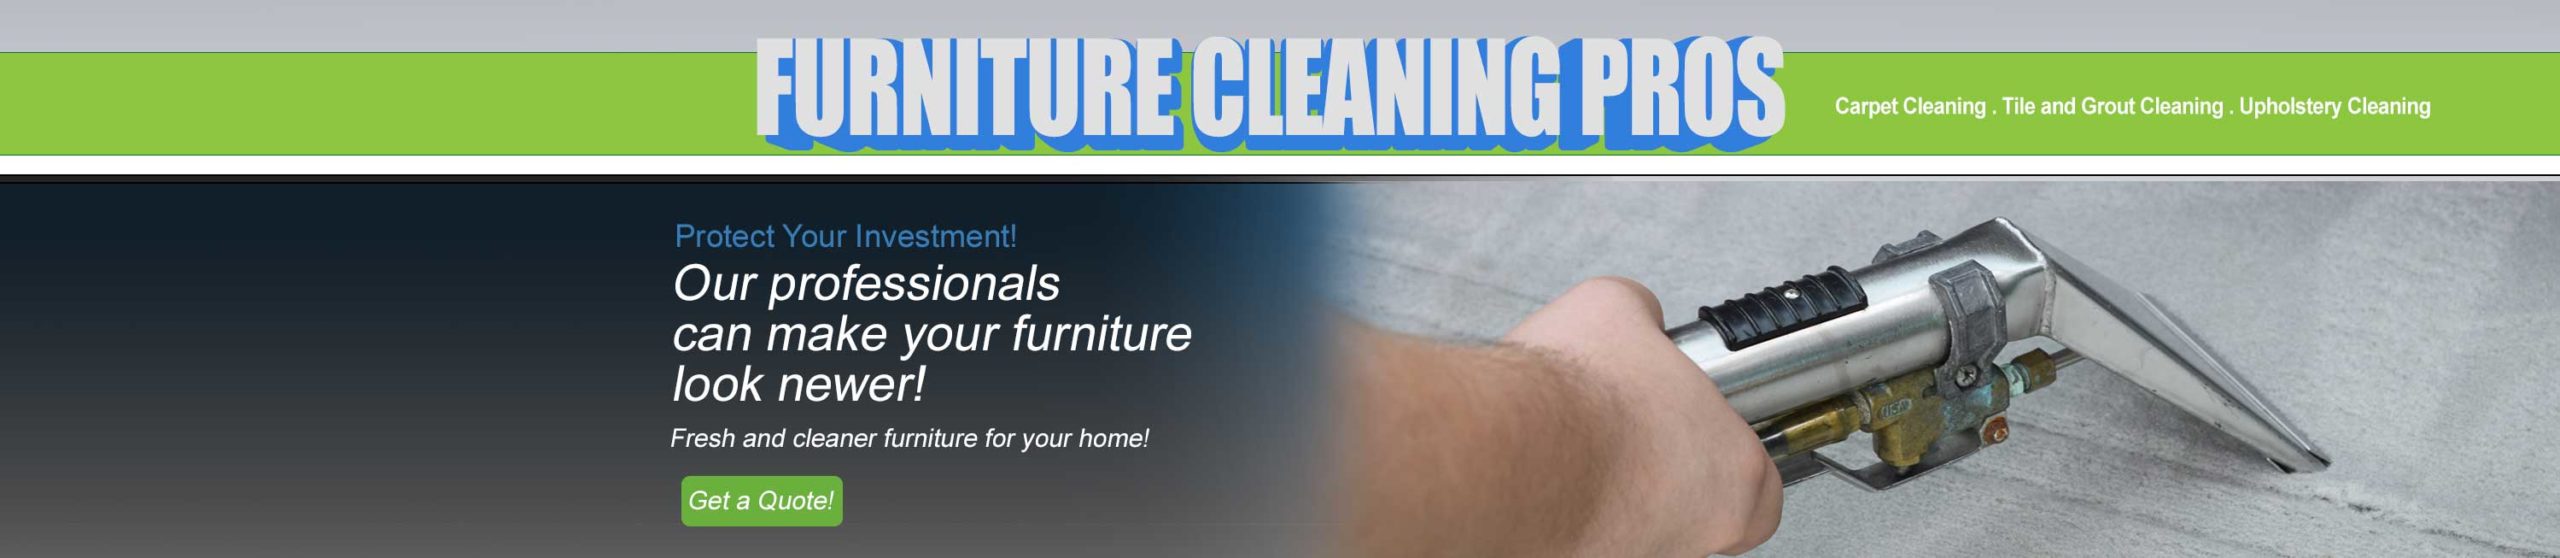 Furniture and upholstery cleaning in Tolleson AZ